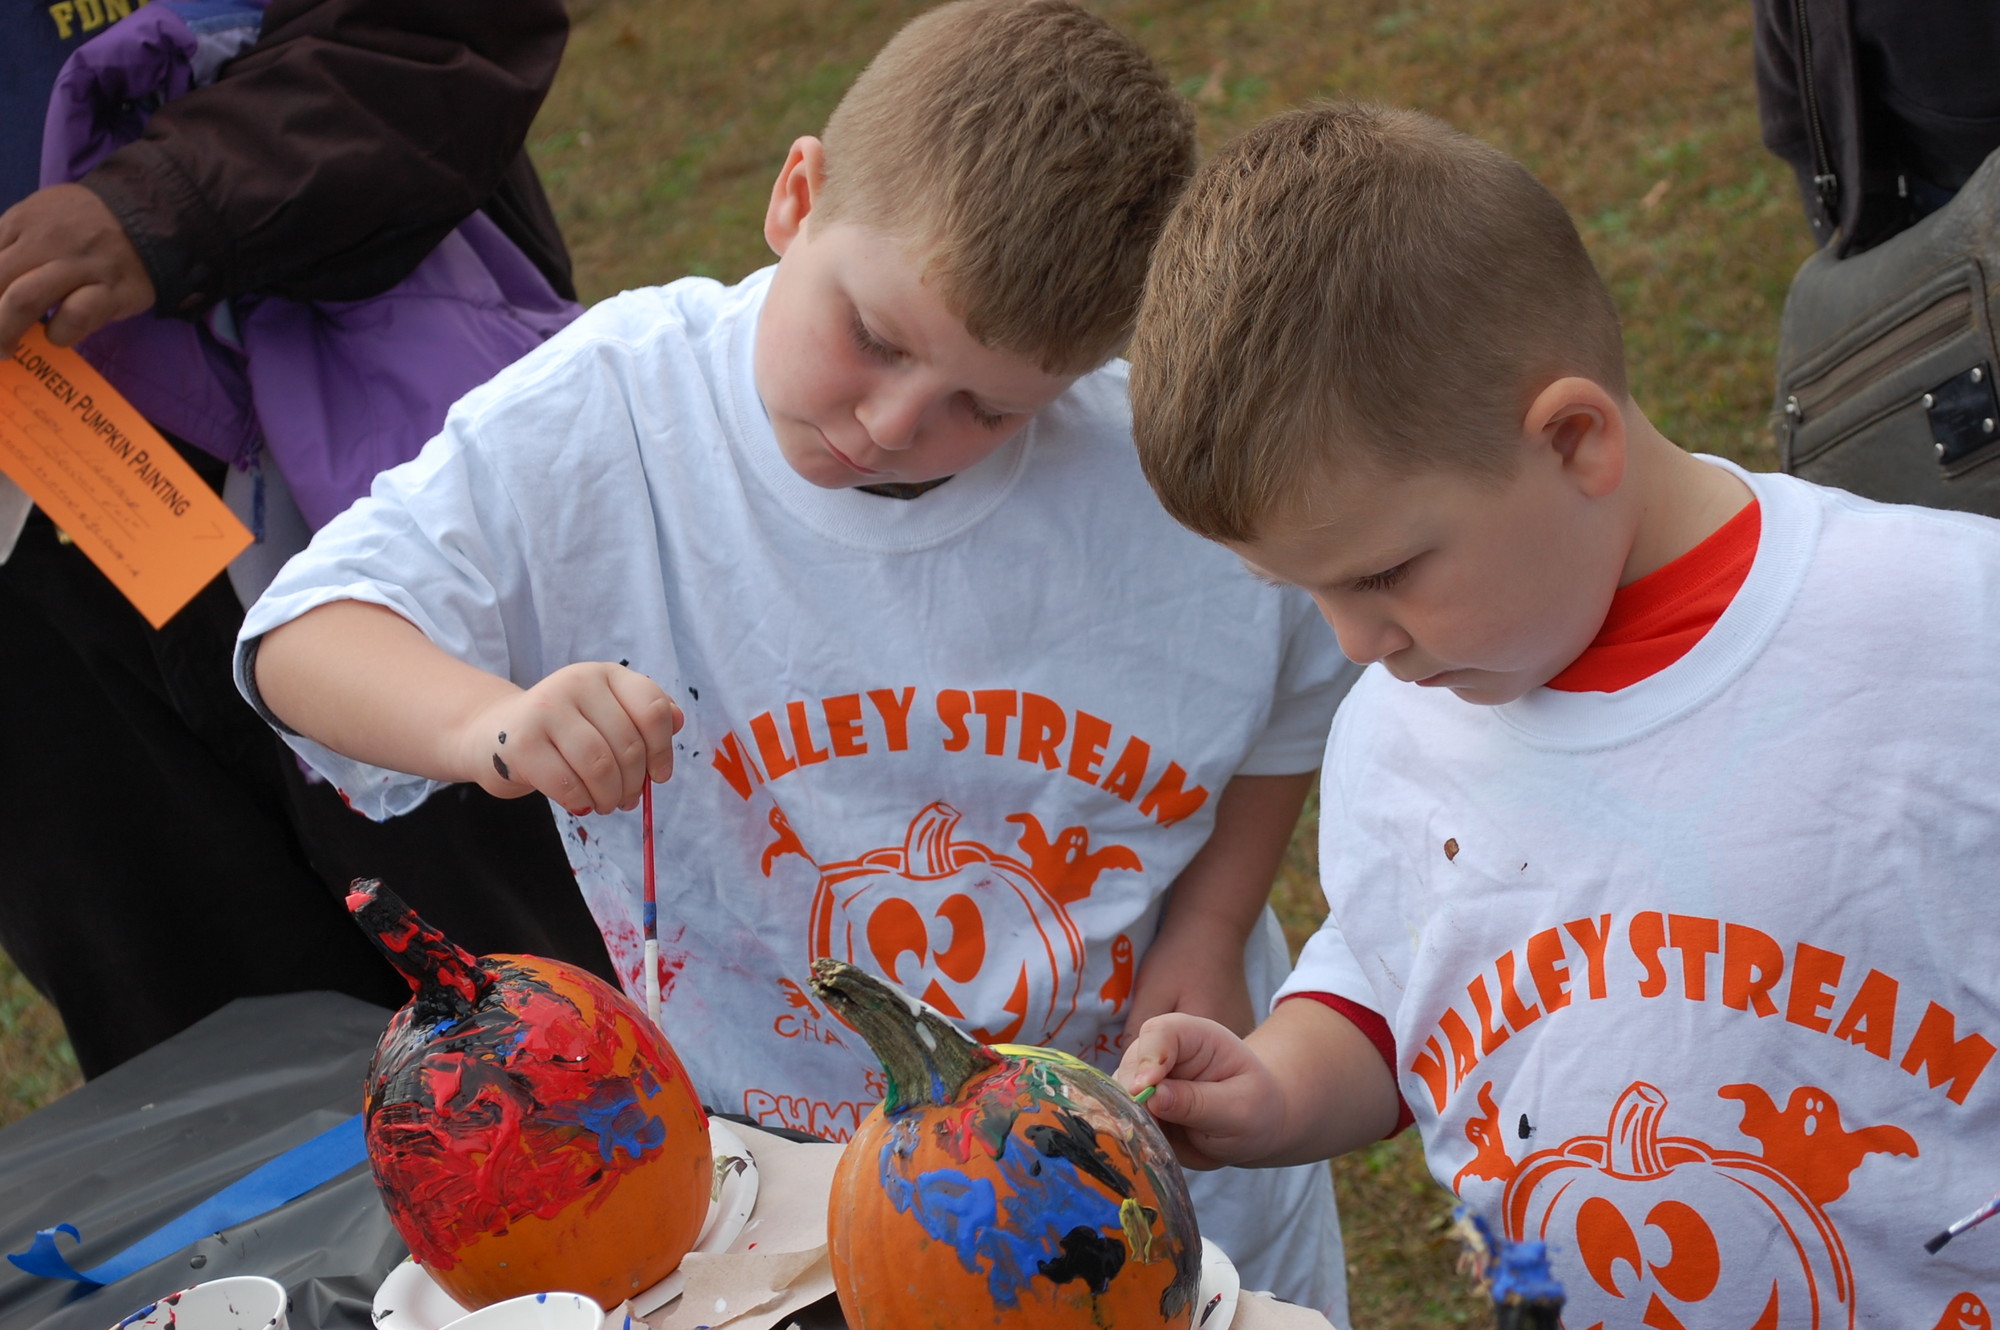 Very little orange could be found once brothers Antonio Casoria, 6, left, and Dominick, 5, got done with their creations at the village